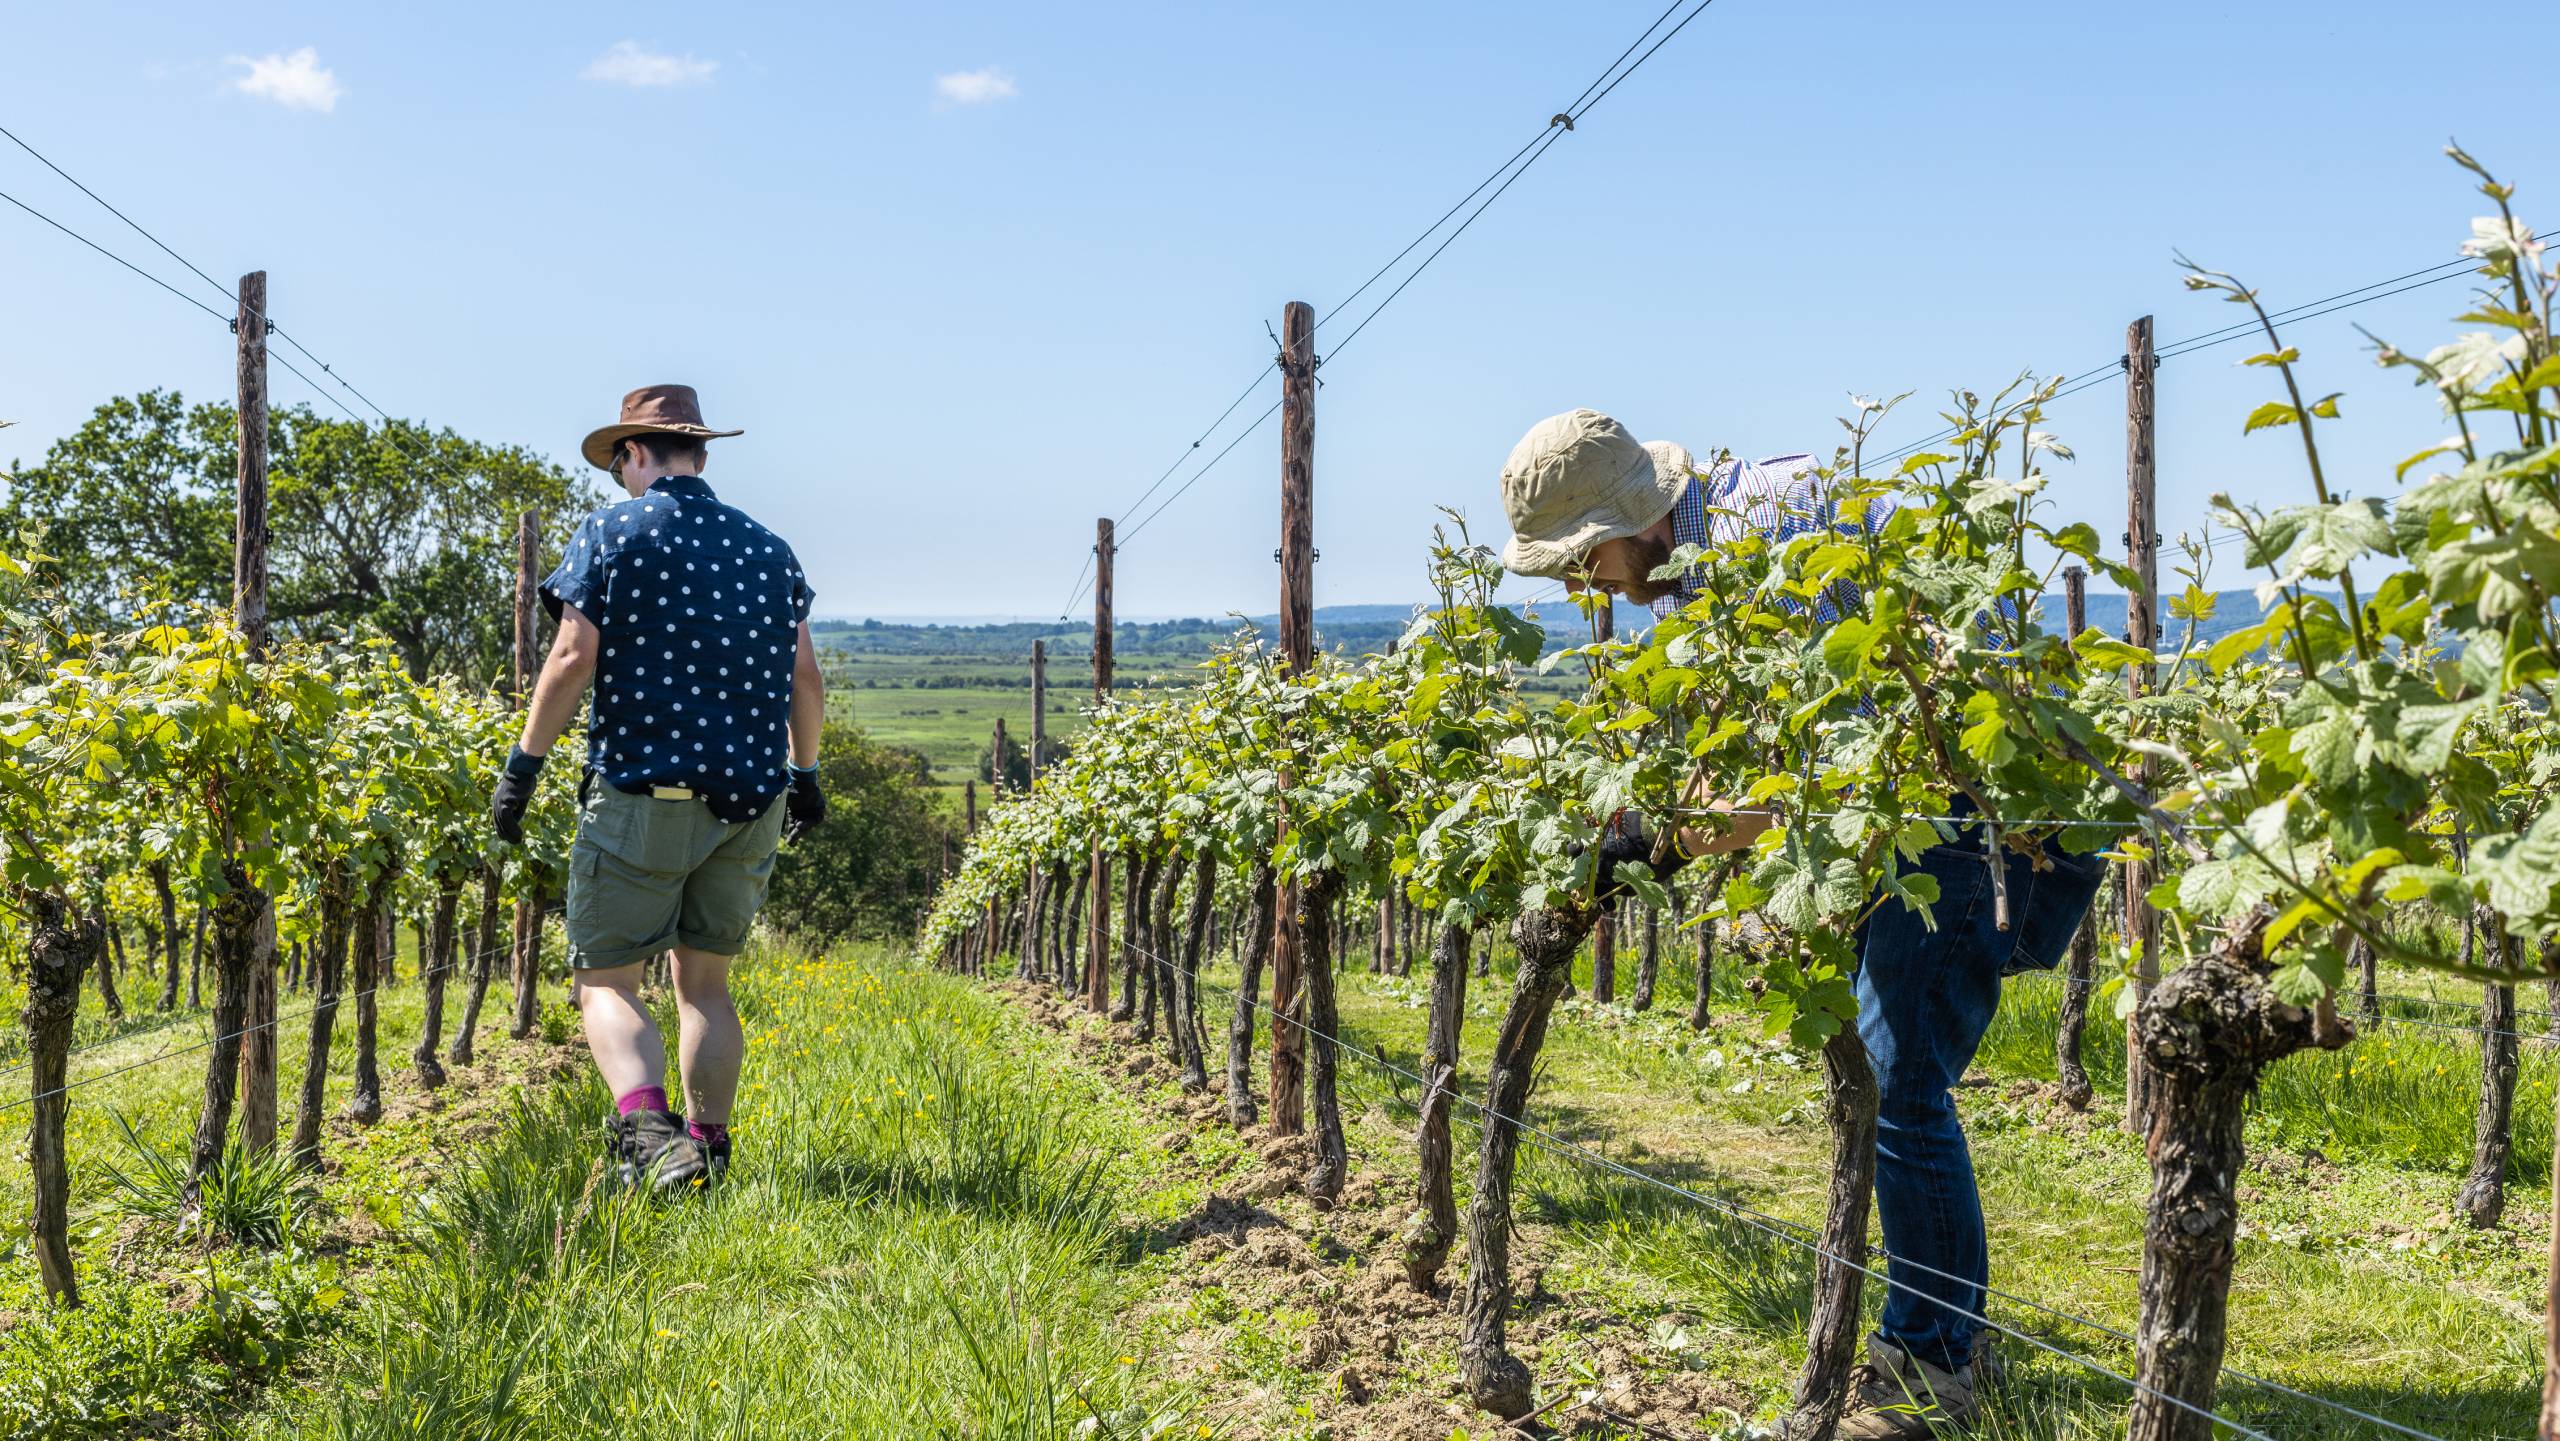 Two men working in Henners vineyard in East Sussex, England